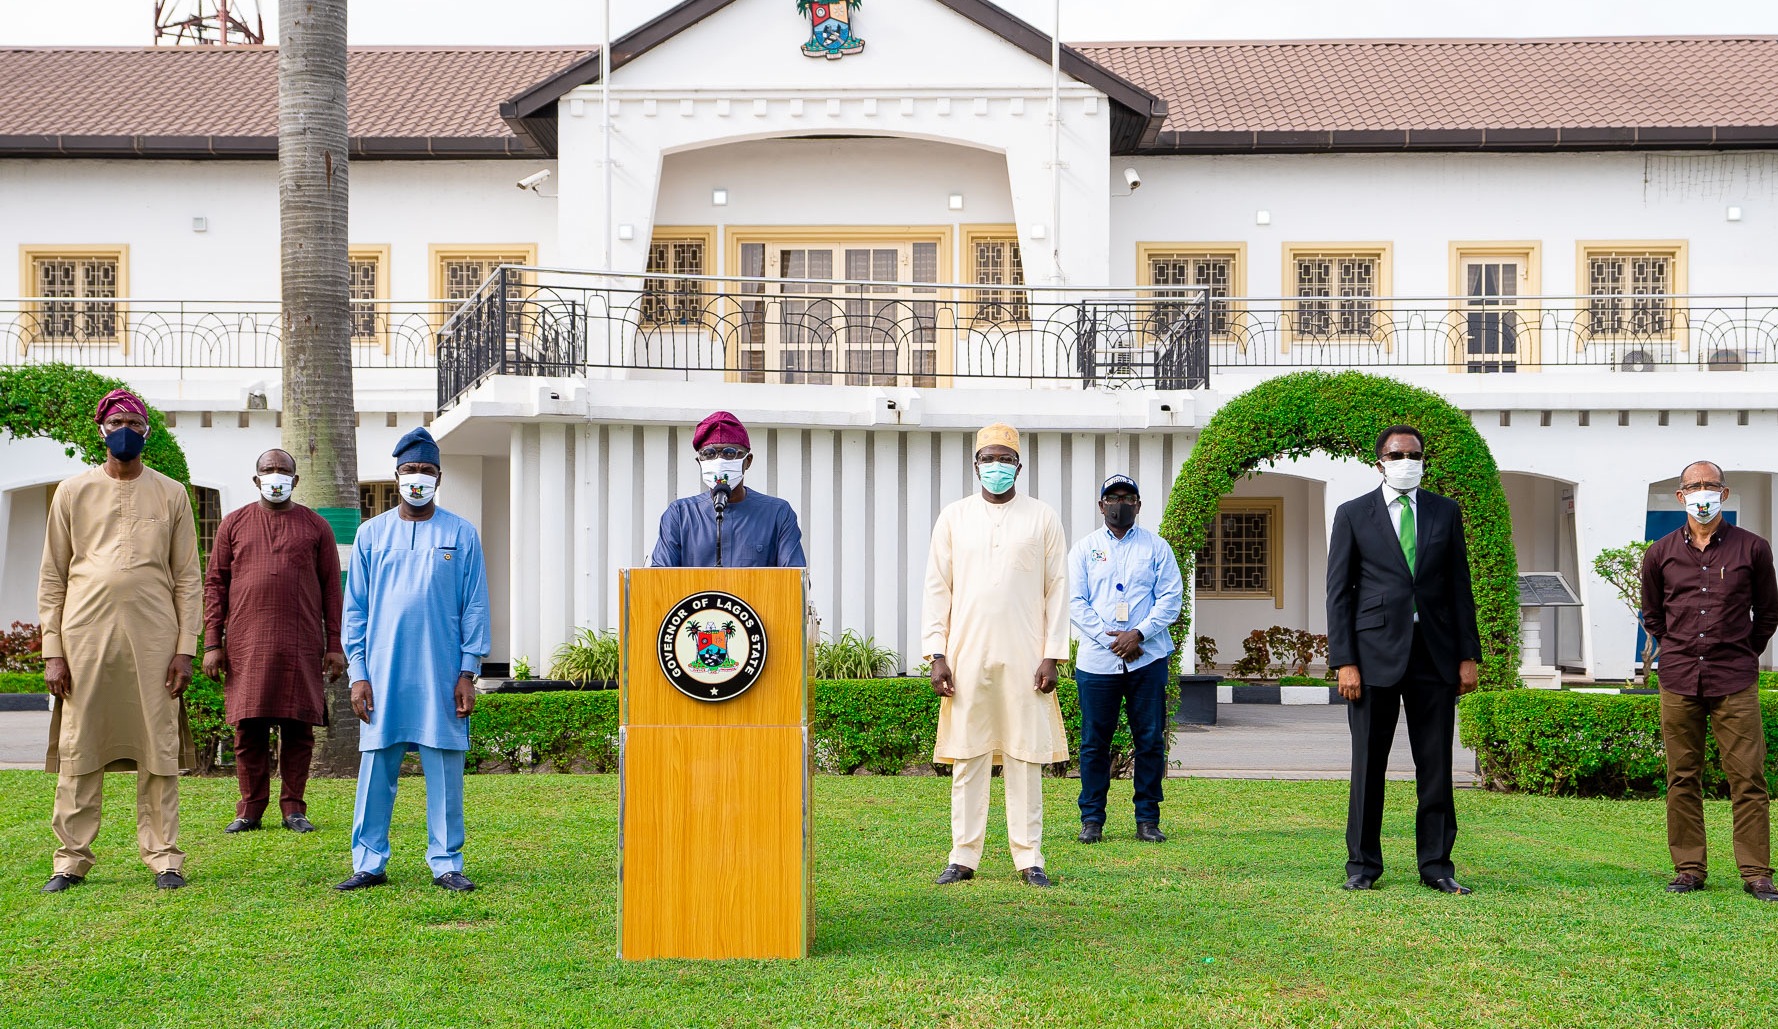 L-R: Chief of Staff to the Lagos State Governor, Mr. Tayo Ayinde; Deputy Governor, Dr. Obafemi Hamzat; Governor Babajide Sanwo-Olu; Head of Service, Mr. Hakeem Muri-Okunola; Attorney General/Commissioner for Justice, Mr. Moyo Onigbanjo, SAN and Commissioner for Health, Prof. Akin Abayomi, during a press briefing on C0VID-19 update, at Lagos House, Marina, on Tuesday, June 16, 2020.